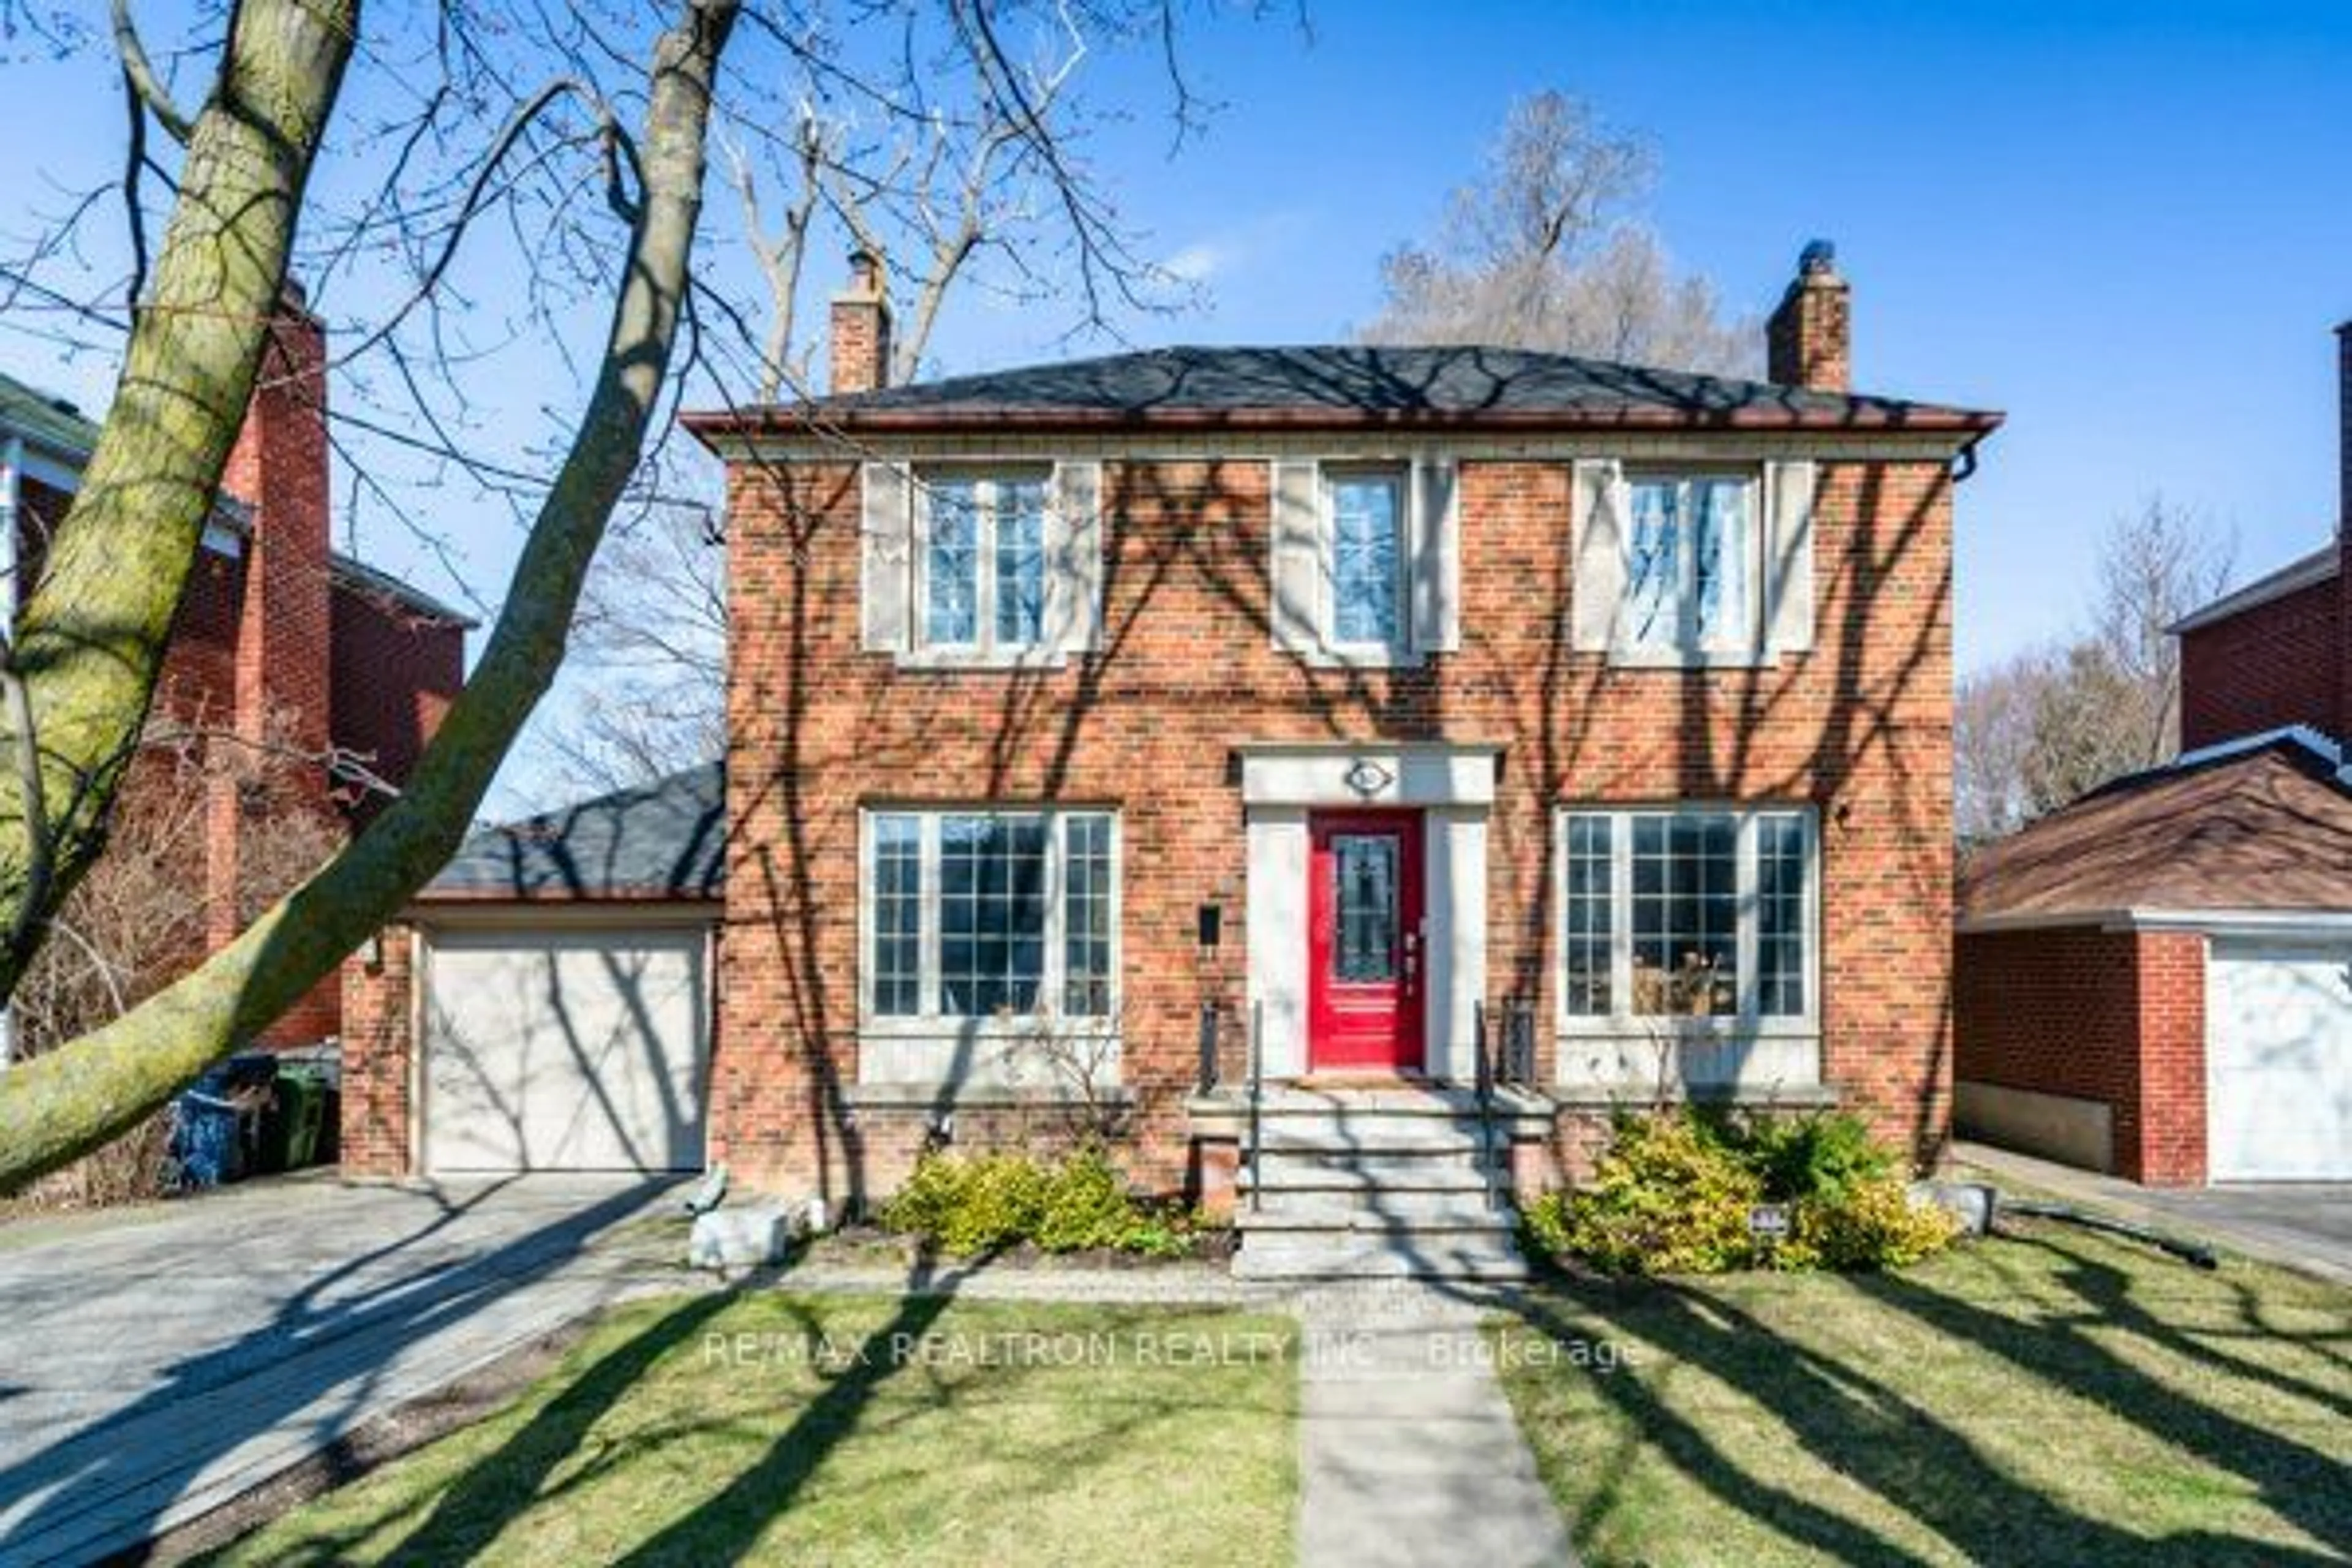 Home with brick exterior material for 30 Bombay Ave, Toronto Ontario M3H 1B7